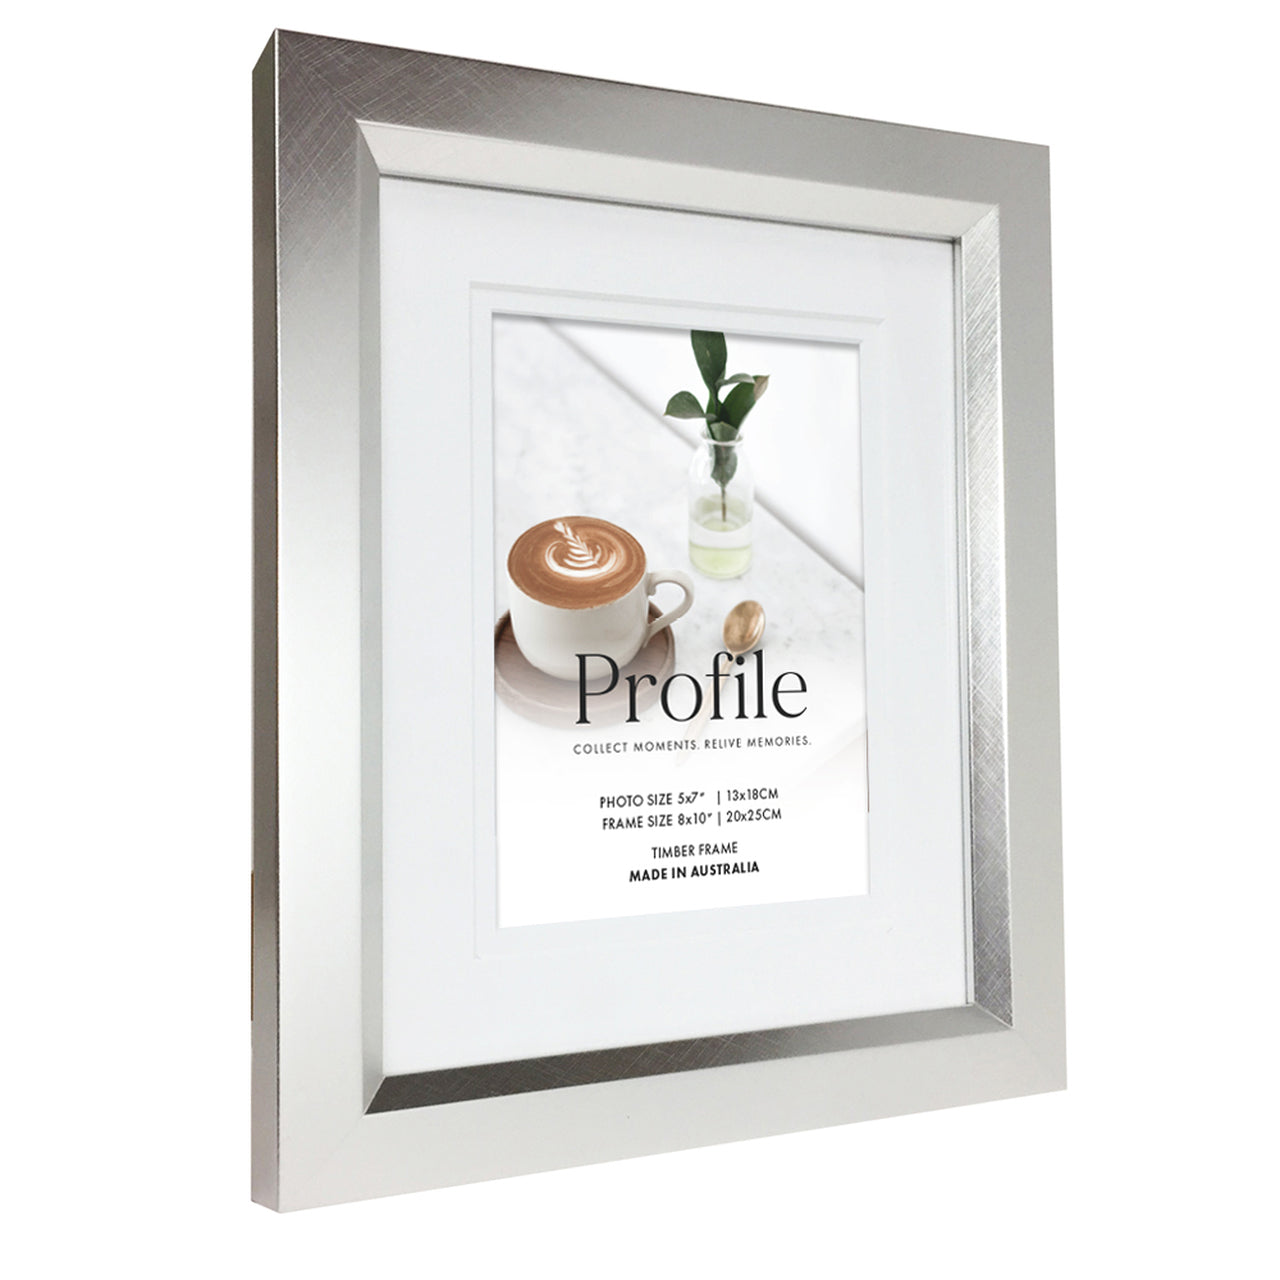 Soho Champagne 10x12 Photo Frame with 6x8 opening